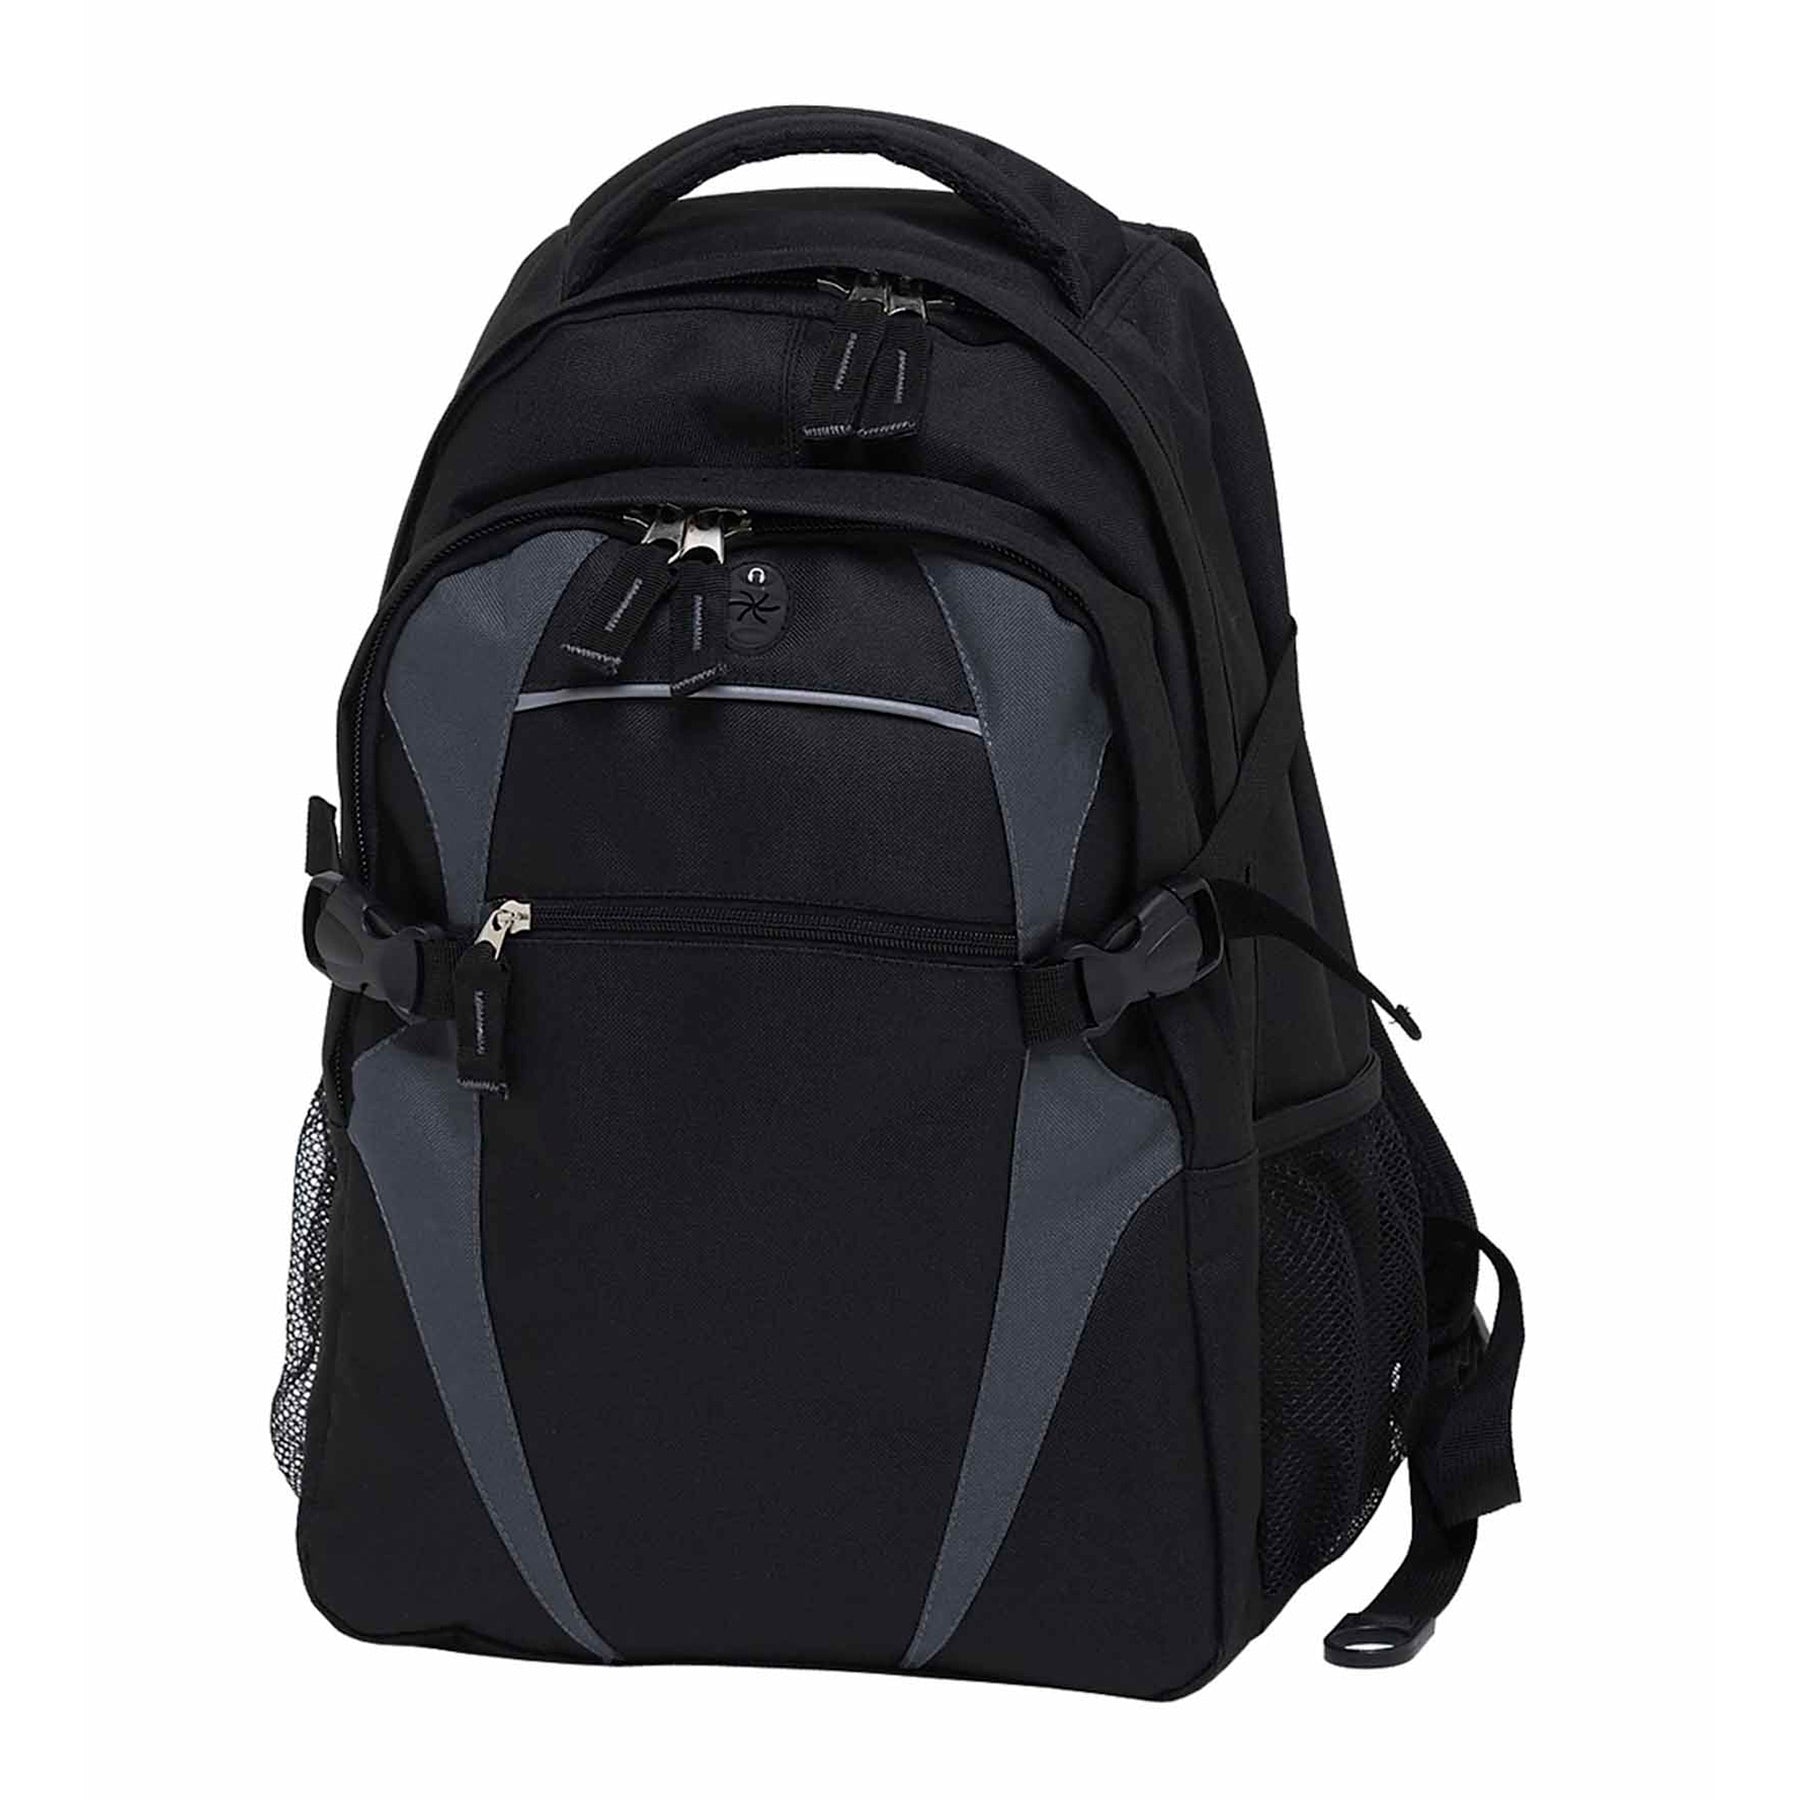 House of Uniforms The Spliced Zenith Backpack Gear for Life Black/Charcoal